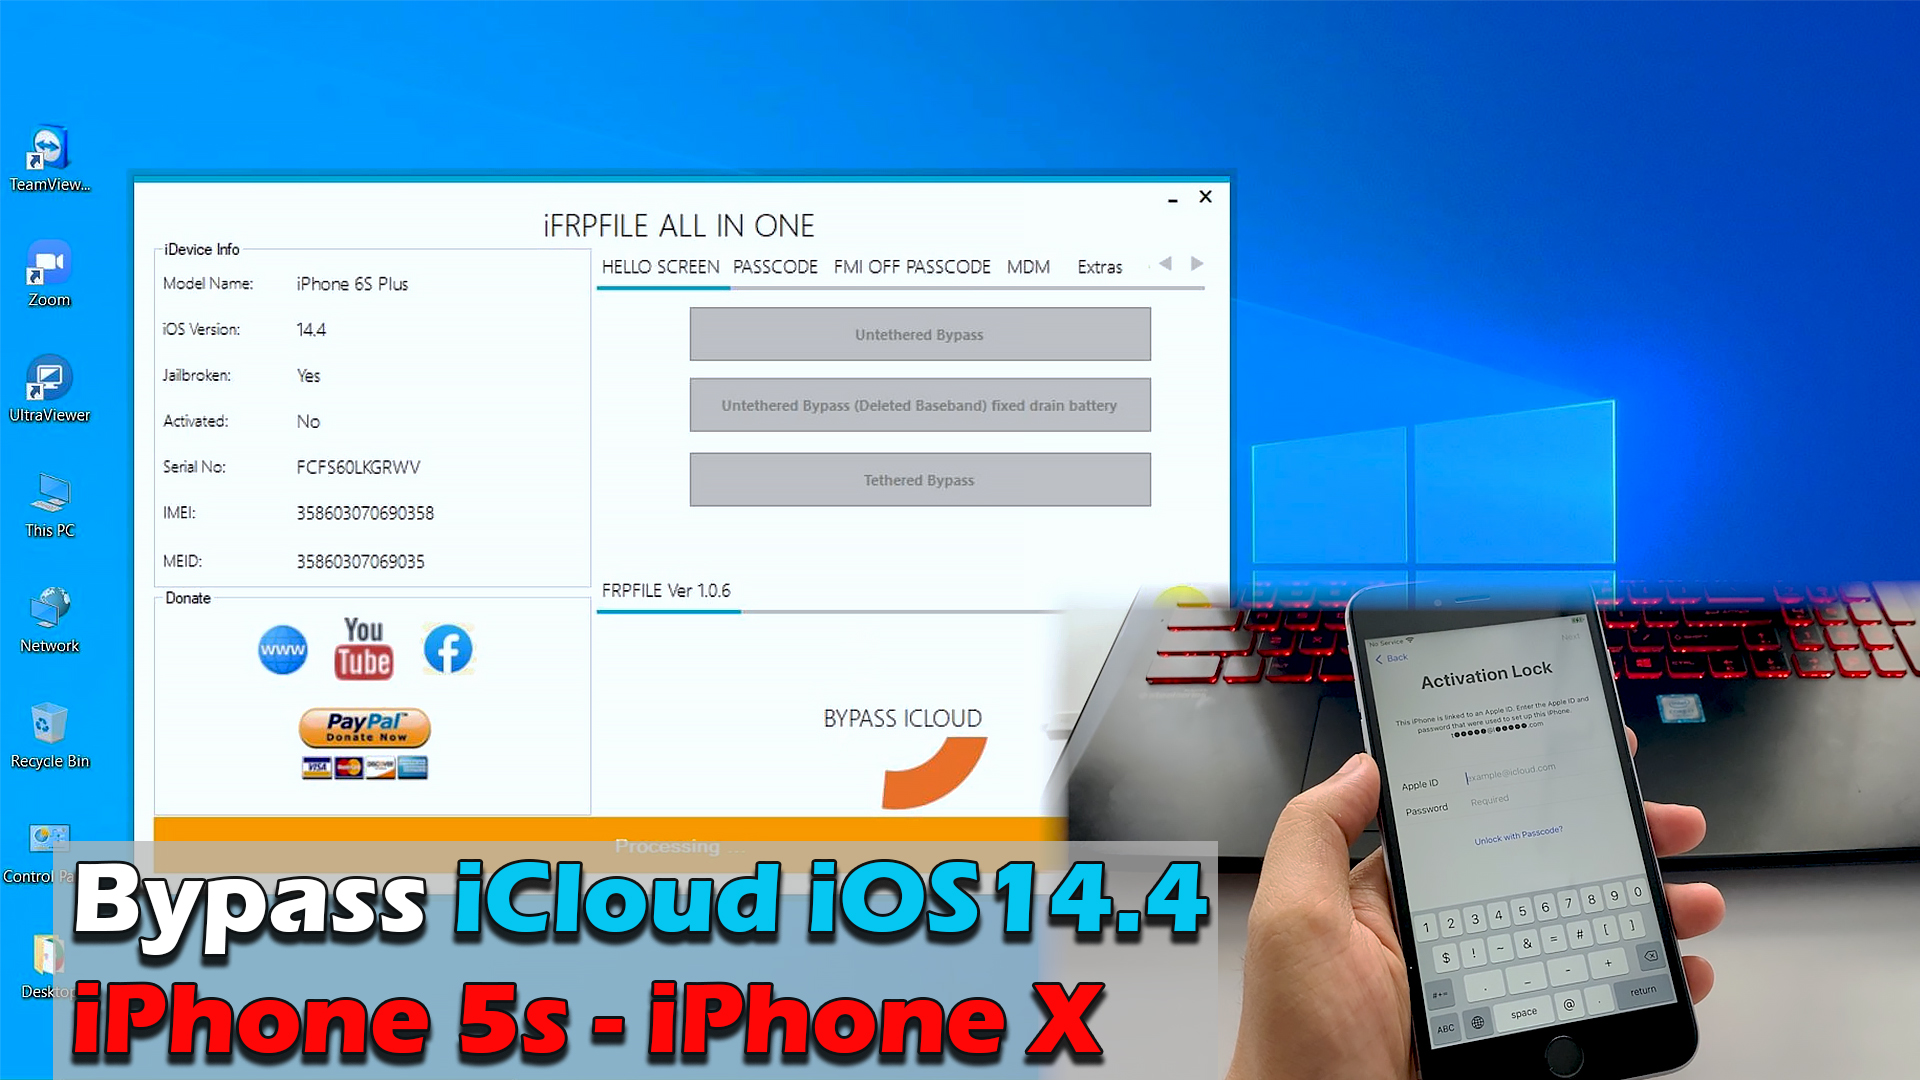 Bypass iCloud iOS 14.4 with 3utools | iPhone 5s - iPhone X